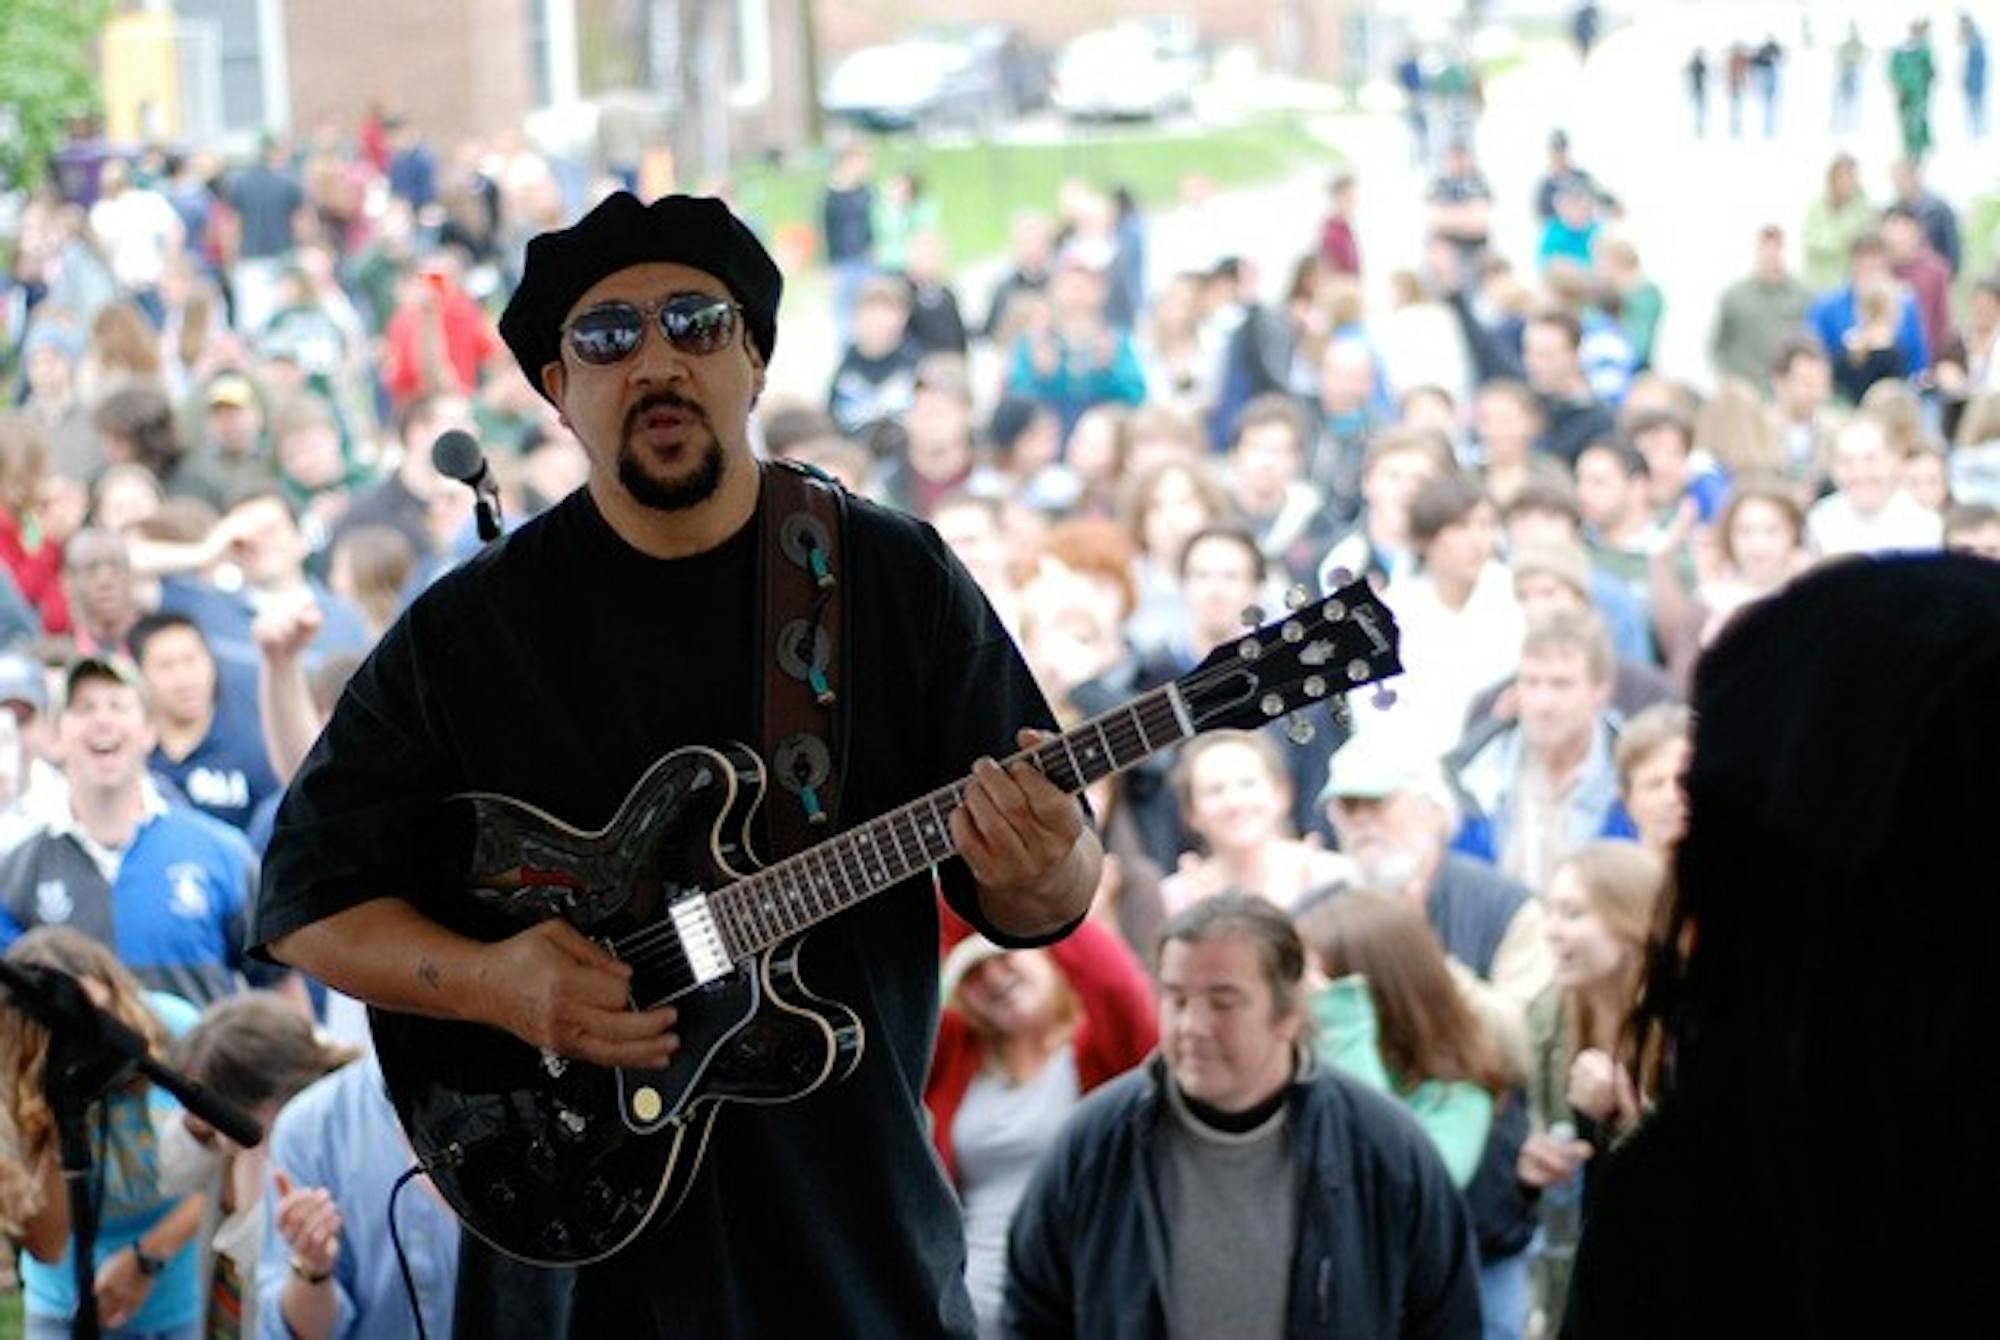 Leo Nocentelli plays to an enthusiastic crowd in front of Phi Delta Alpha fraternity at the Block Party on Friday afternoon.